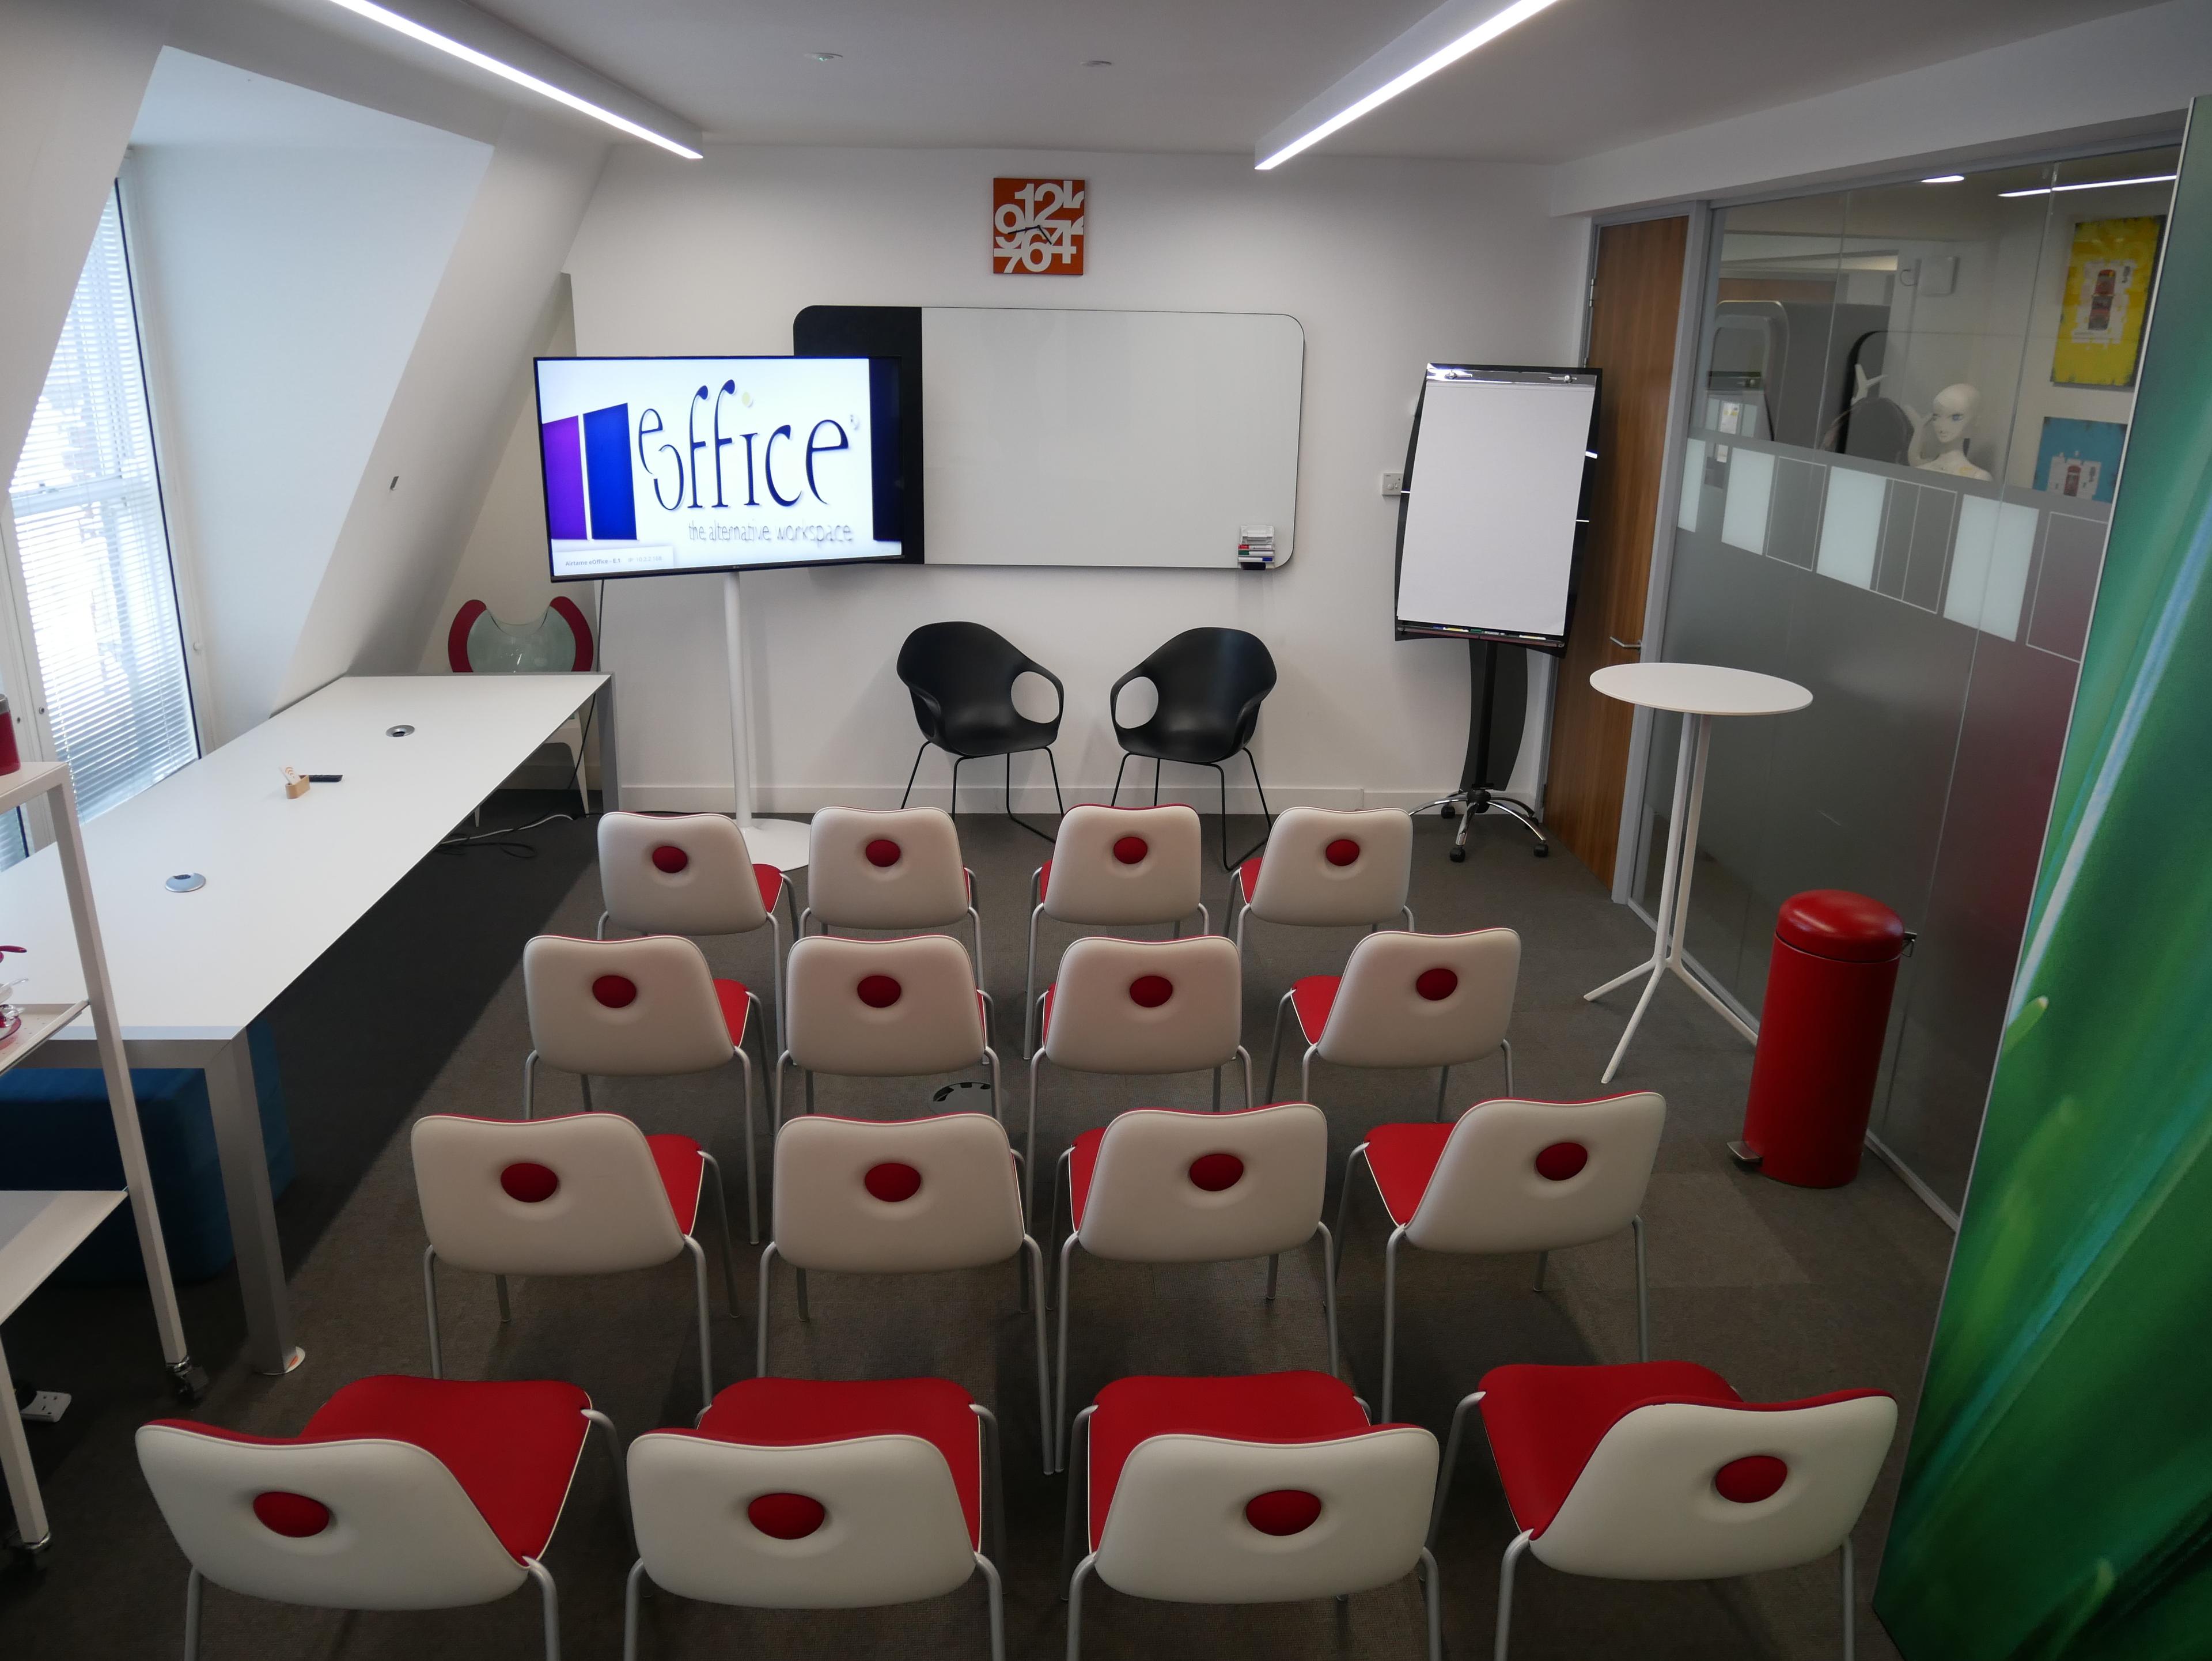 Conference Room For Up To 24 People, eOffice Fitzrovia photo #1